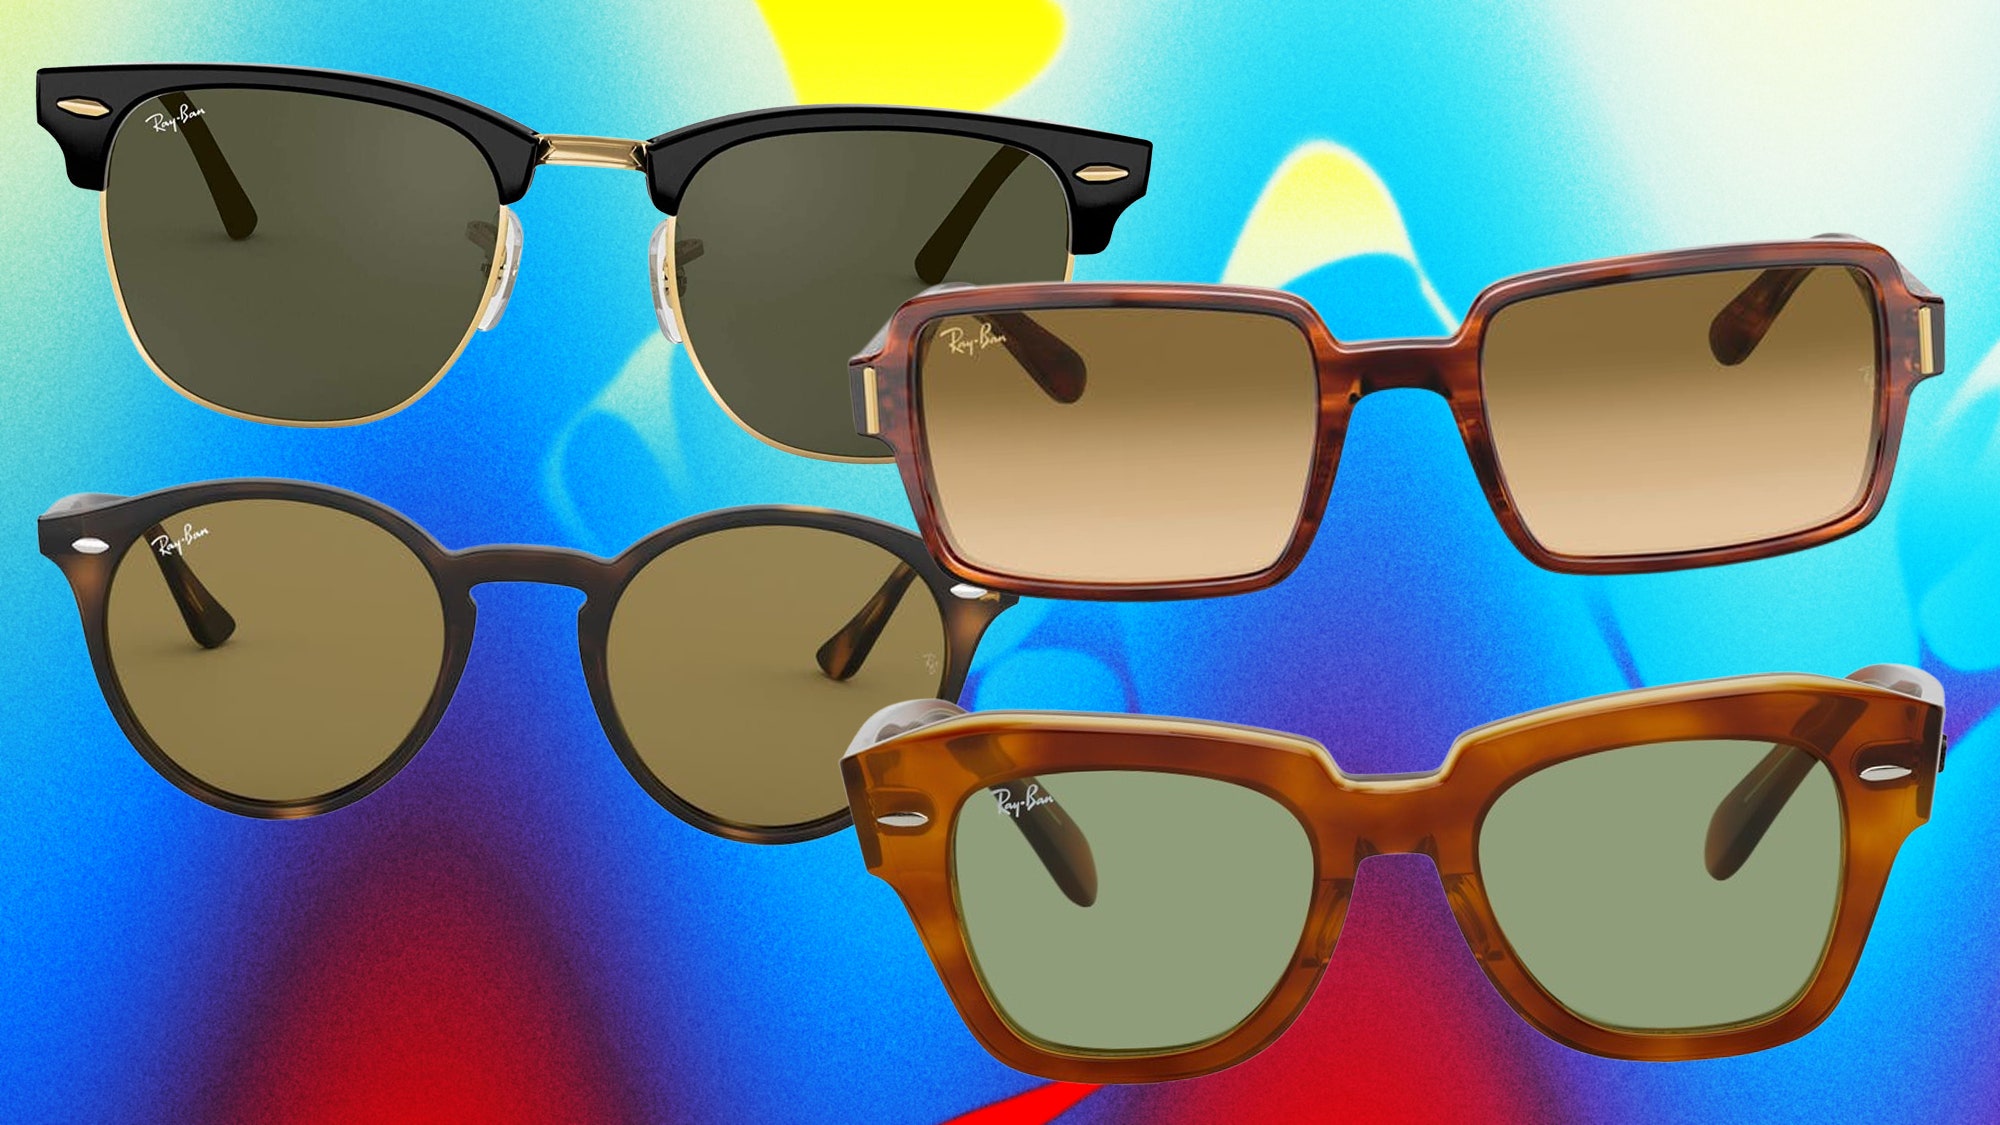 Ray-Ban Shades Are on Sale For Ridiculously Low Prices Right Now